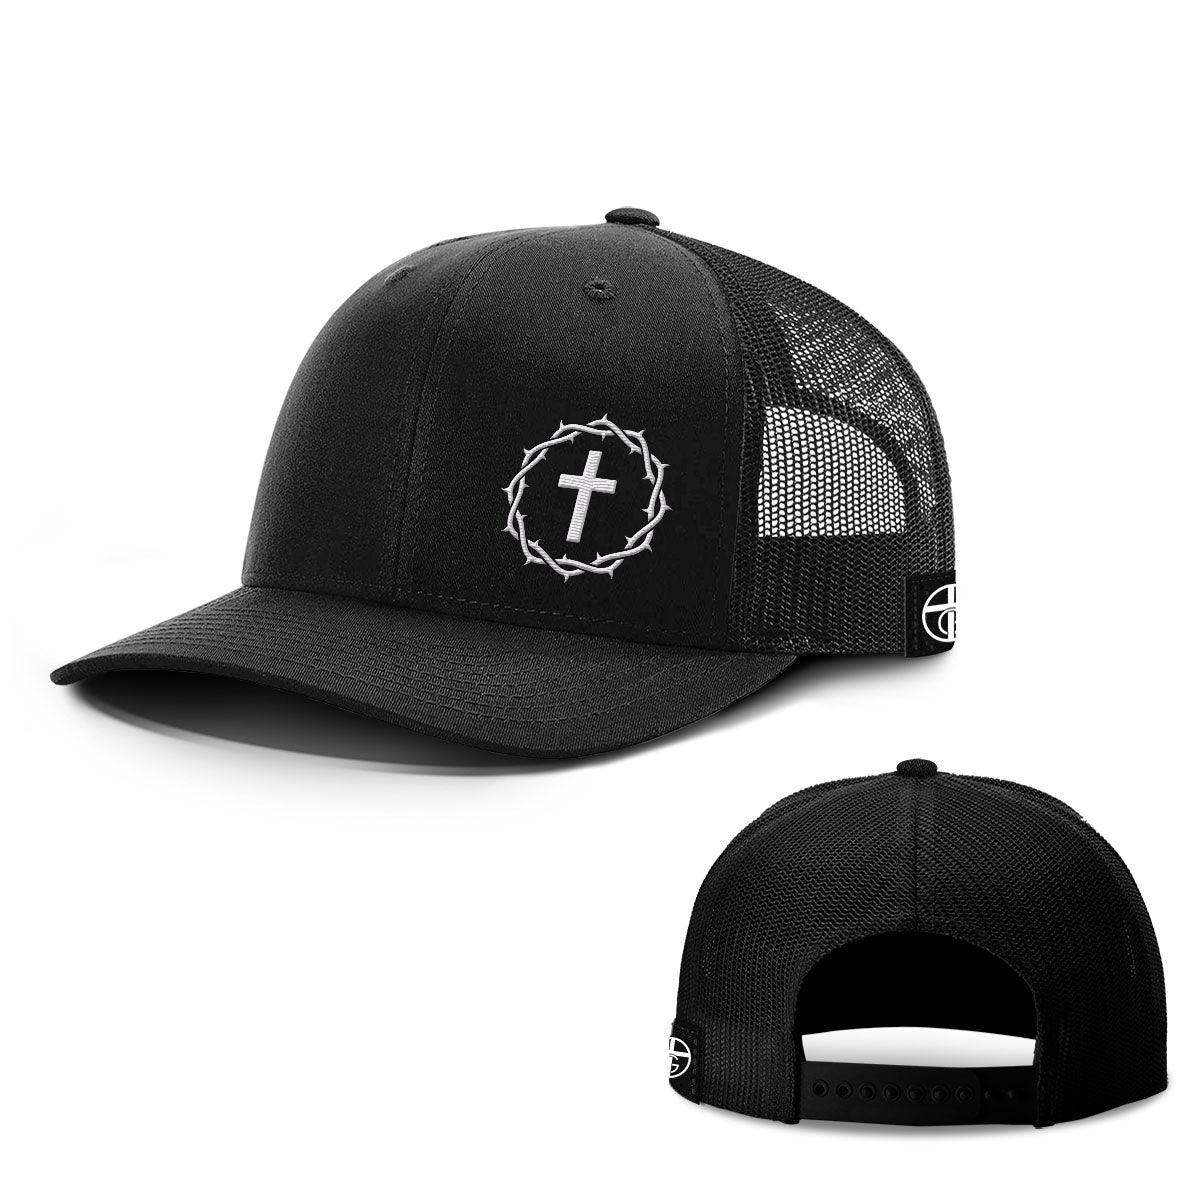 Crown of Thorns Cross Lower Left Hats